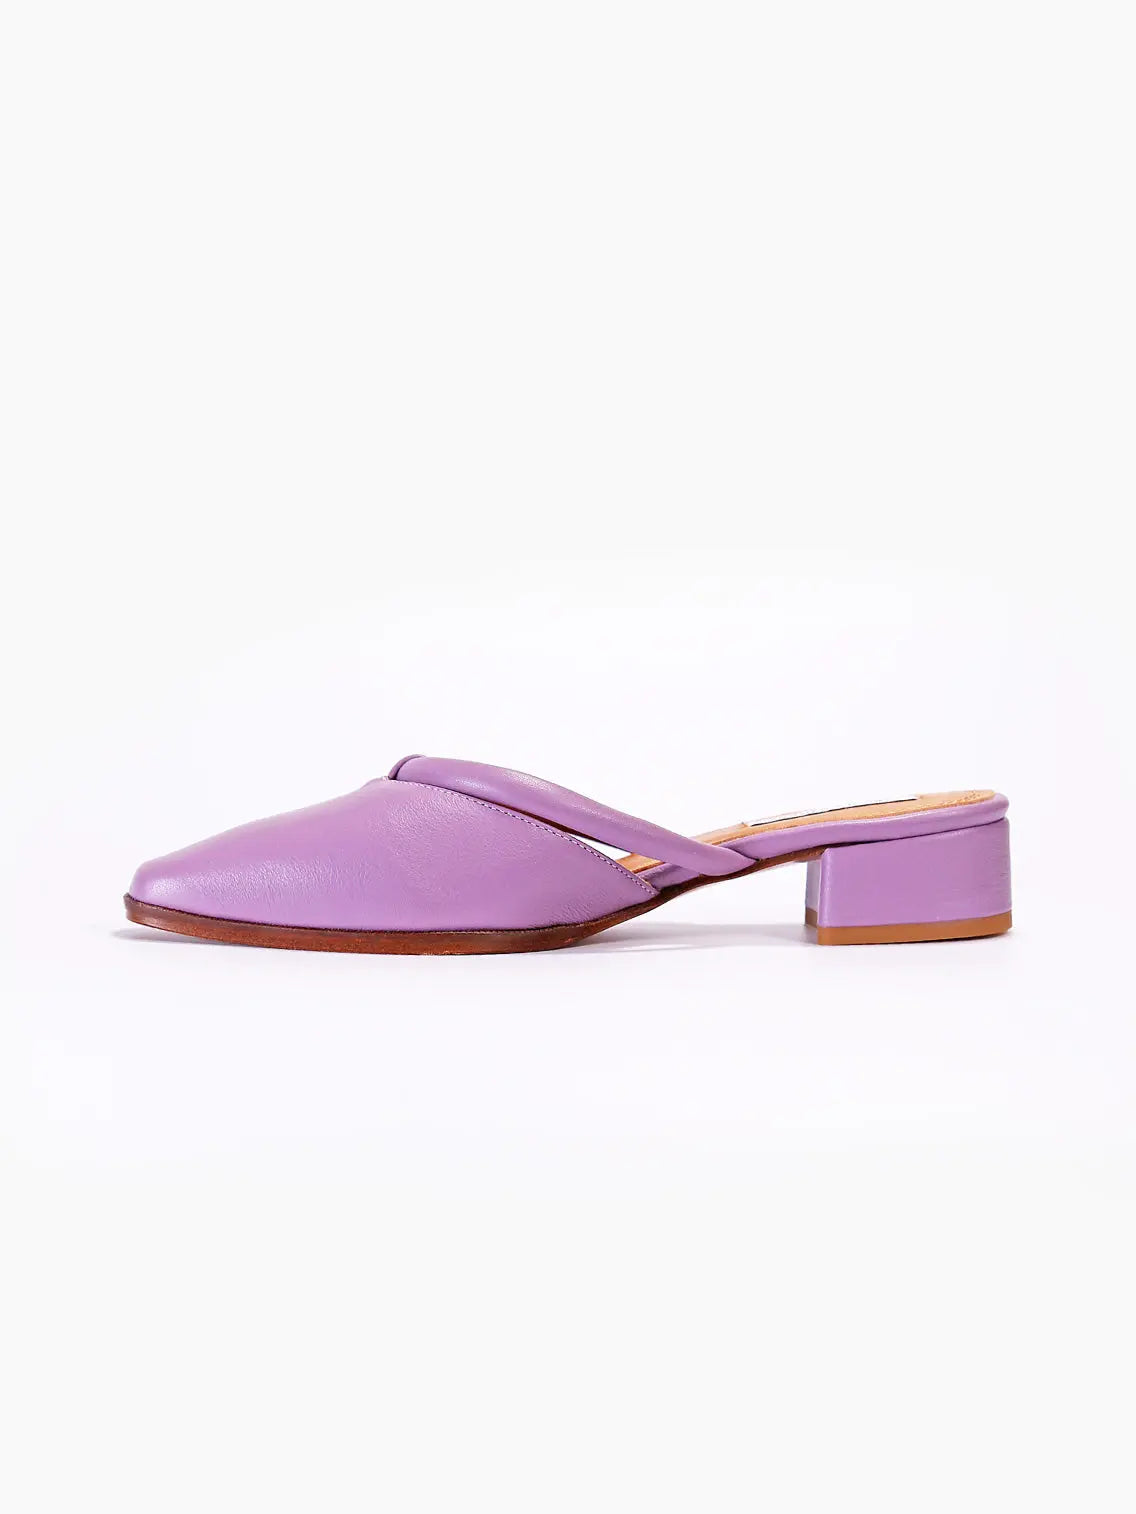 A fashionable lilac open-back mule shoe from Bassalstore features a sleek design with a low block heel and pointed toe. The Simone Floresta Sandals from About Arianne are made of smooth material with a subtle sheen, enhancing their elegant appearance. The inner sole appears cushioned for comfort, perfect for strolling through Barcelona.